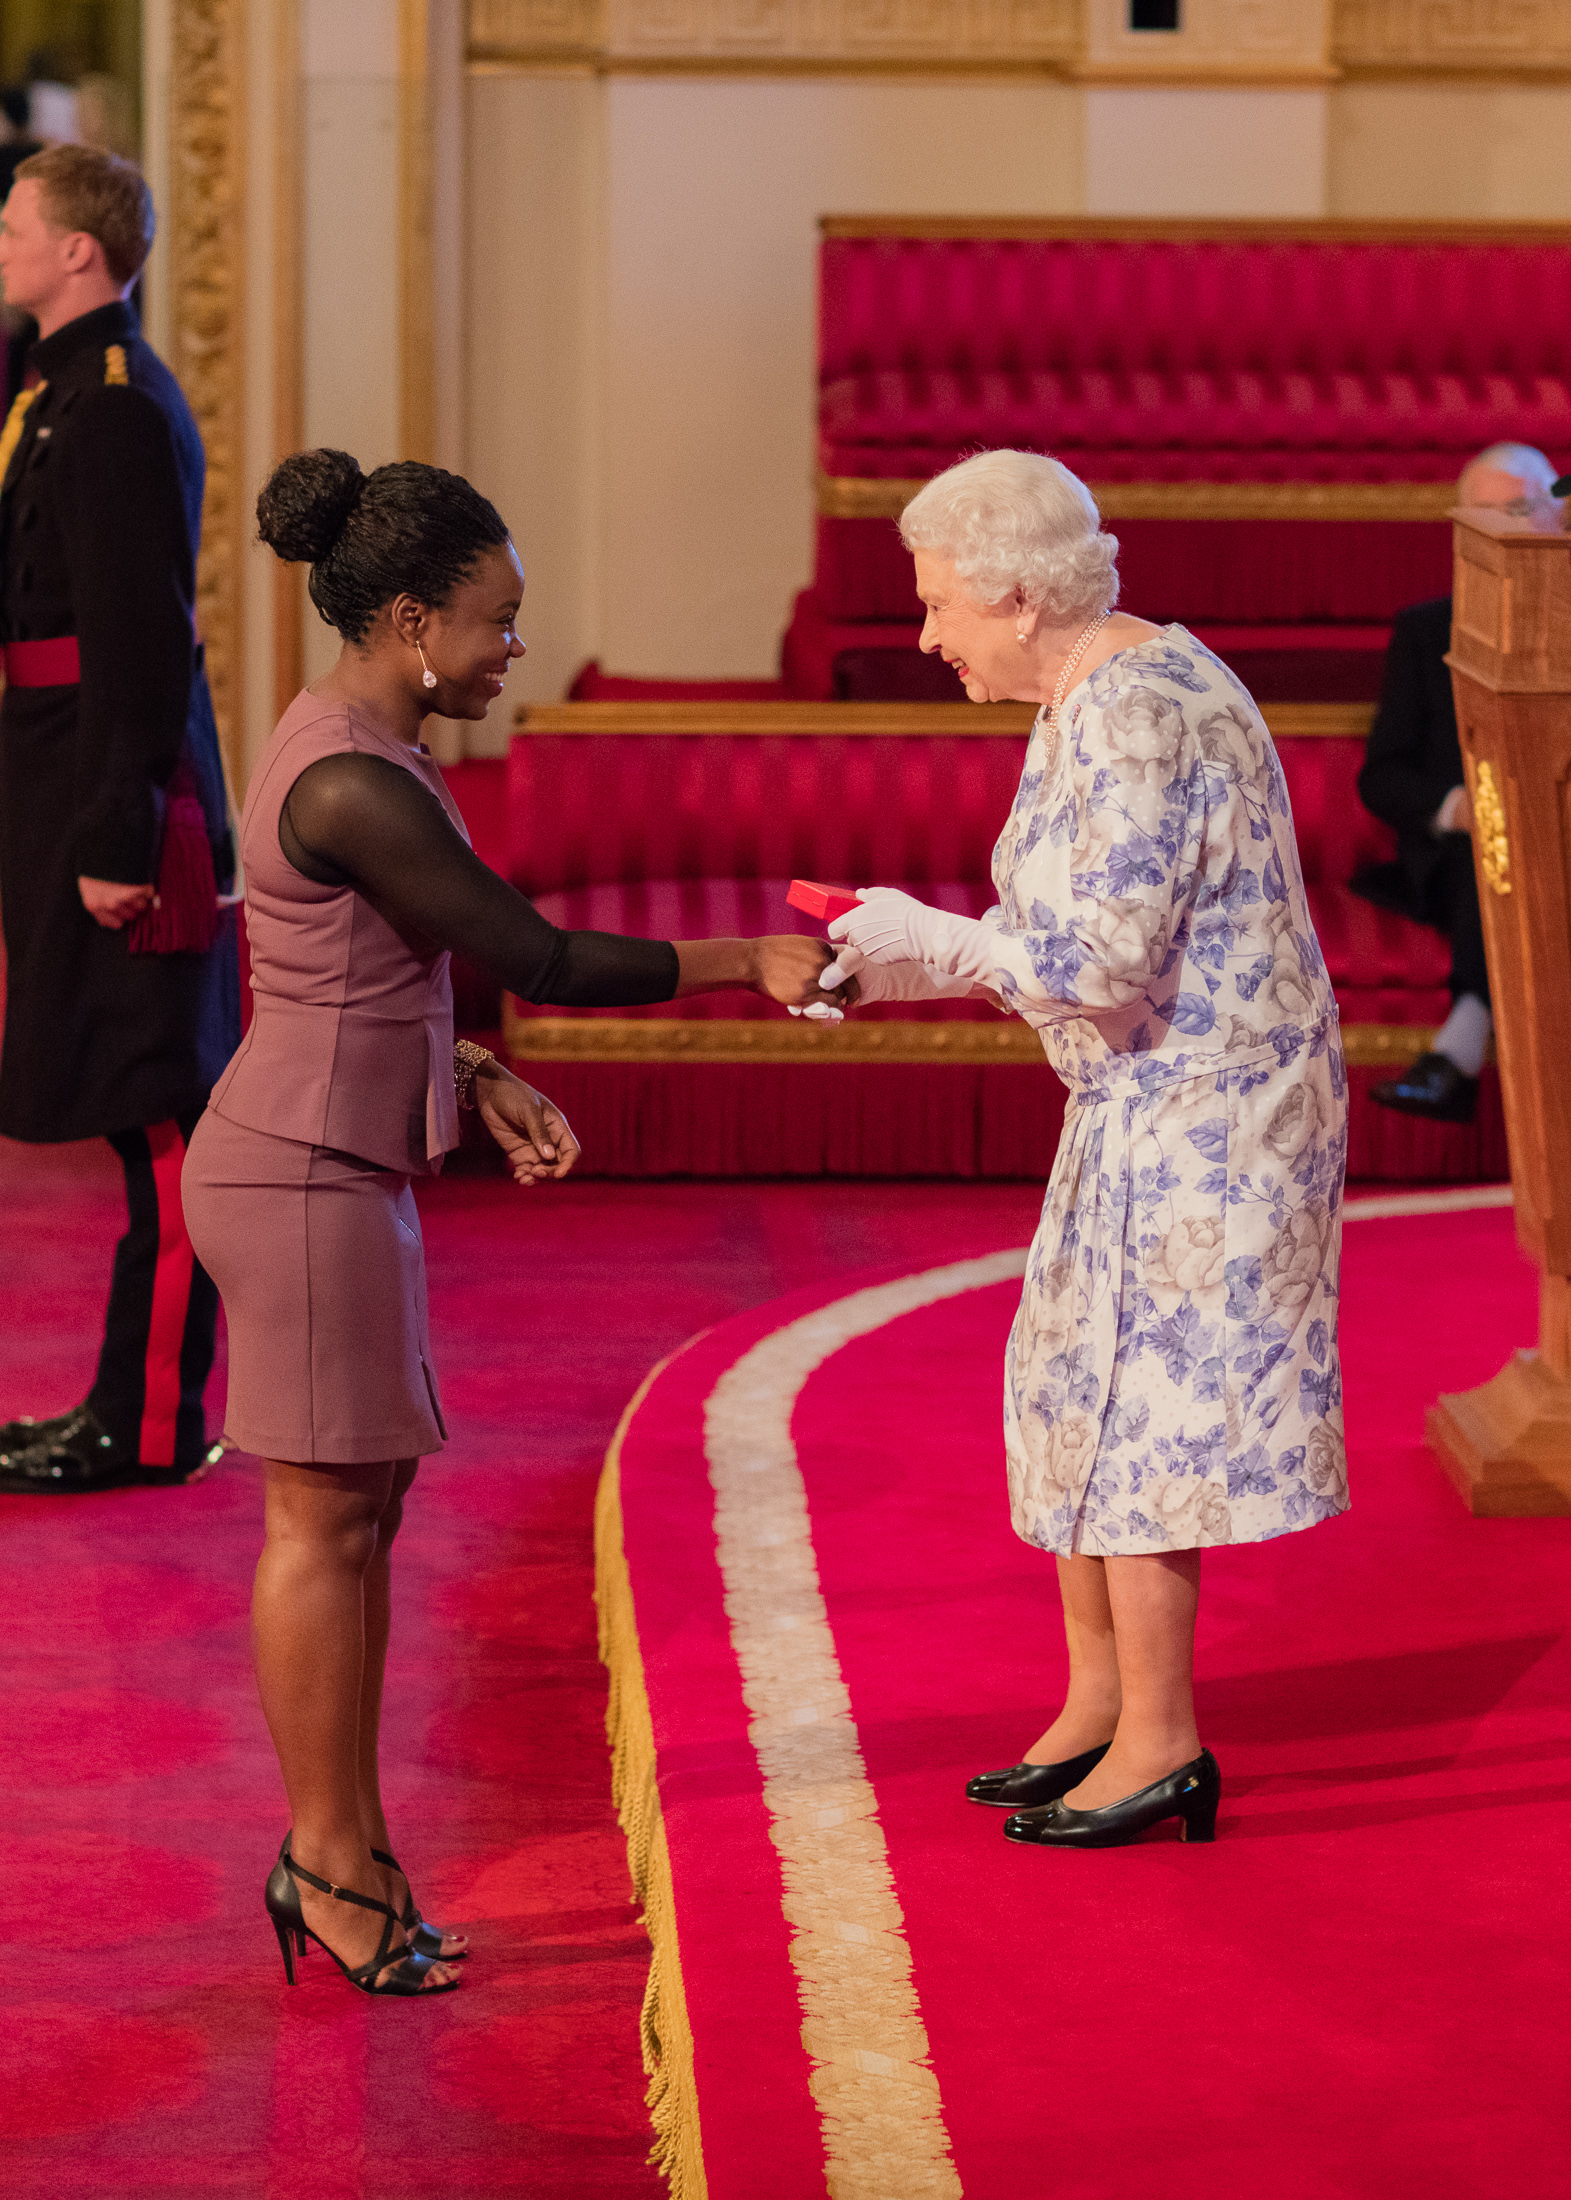 Anayah Phares 2015 Queen's Young Leader